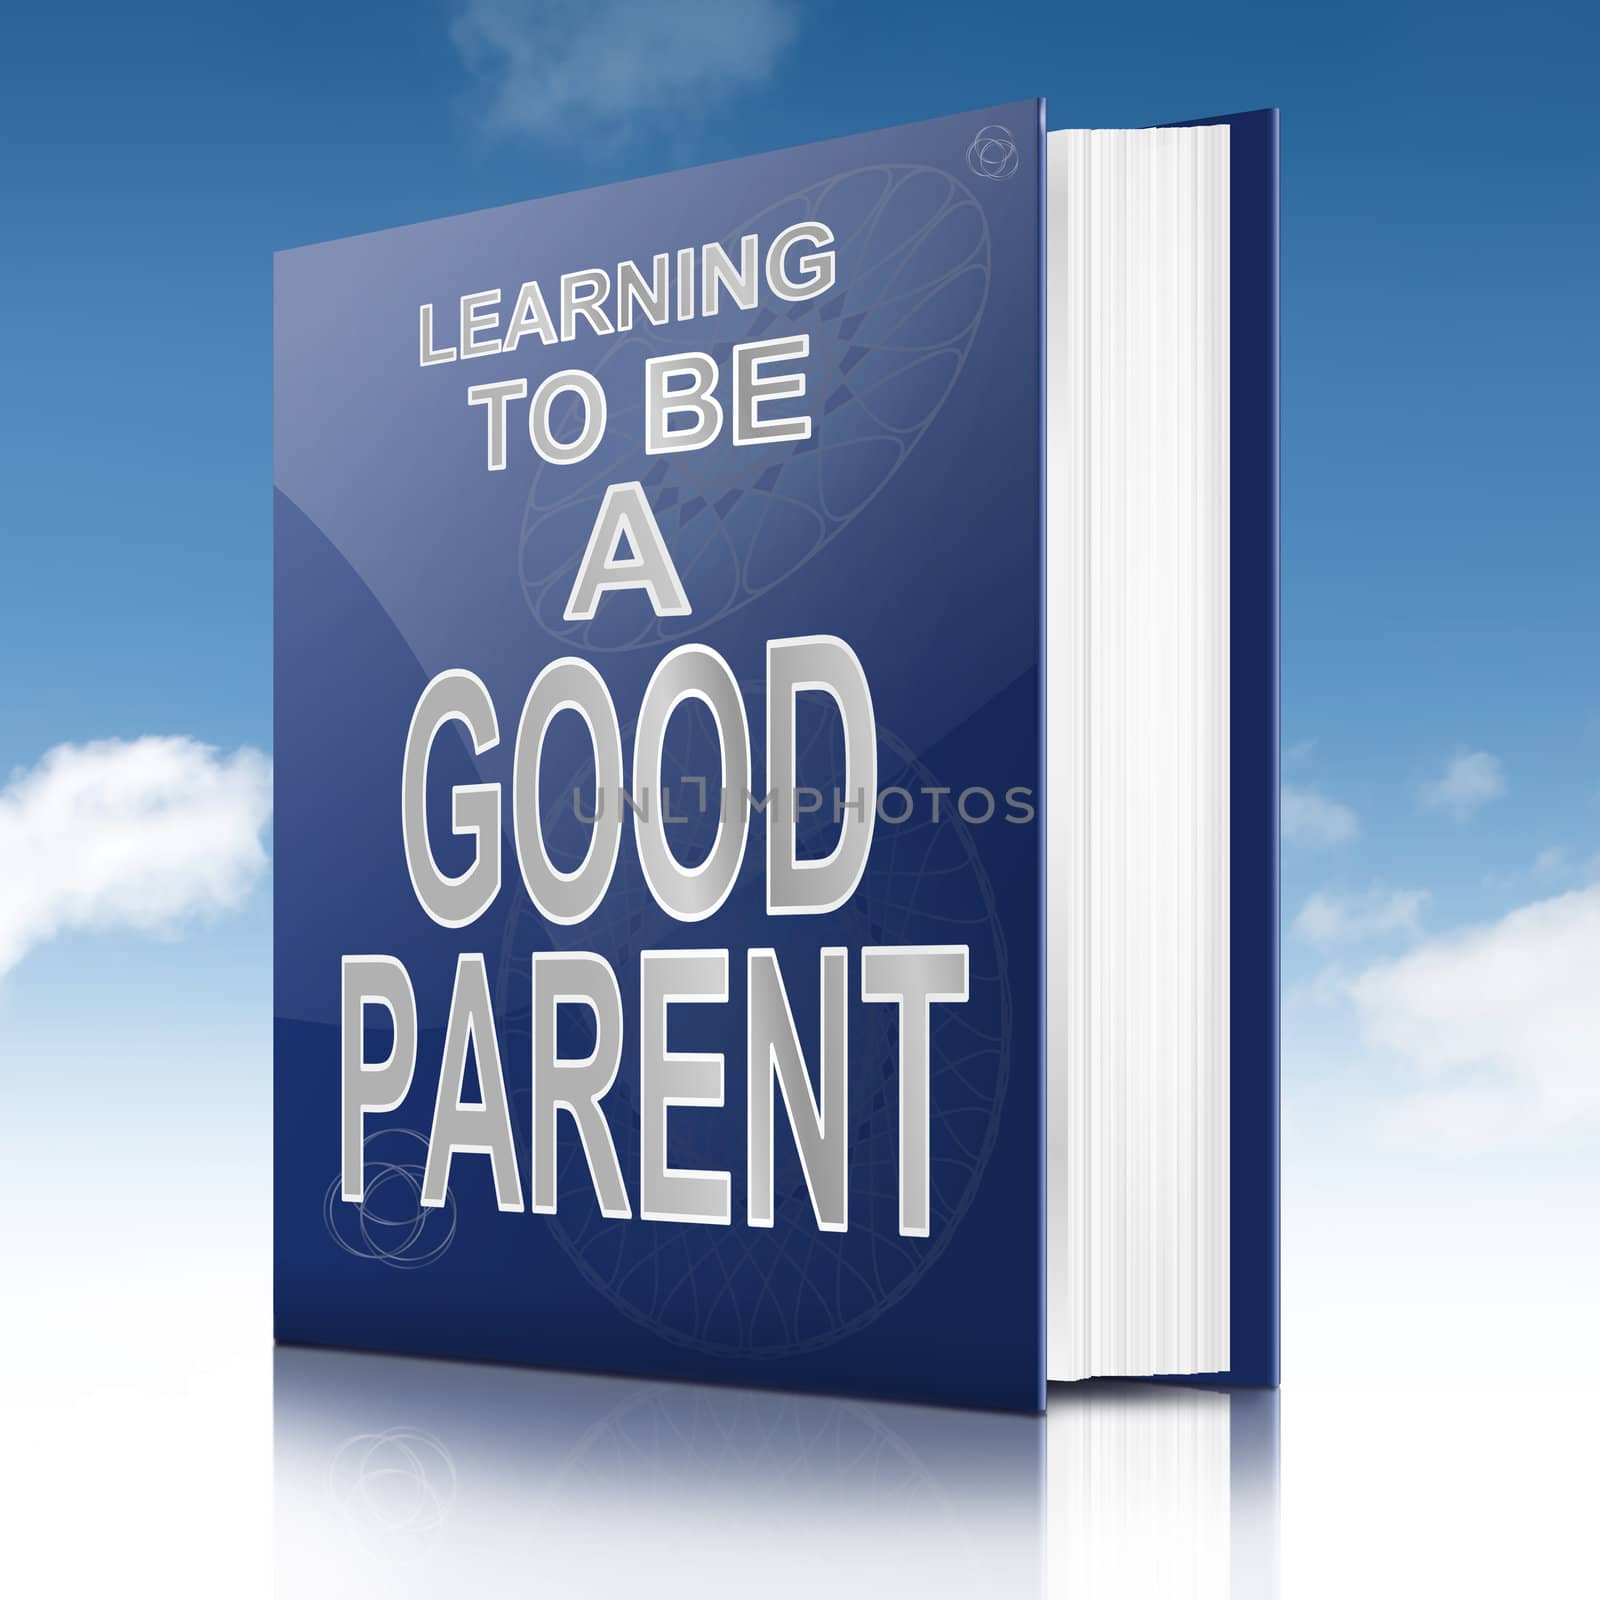 Illustration depicting a book with a parenting concept title. Sky background.